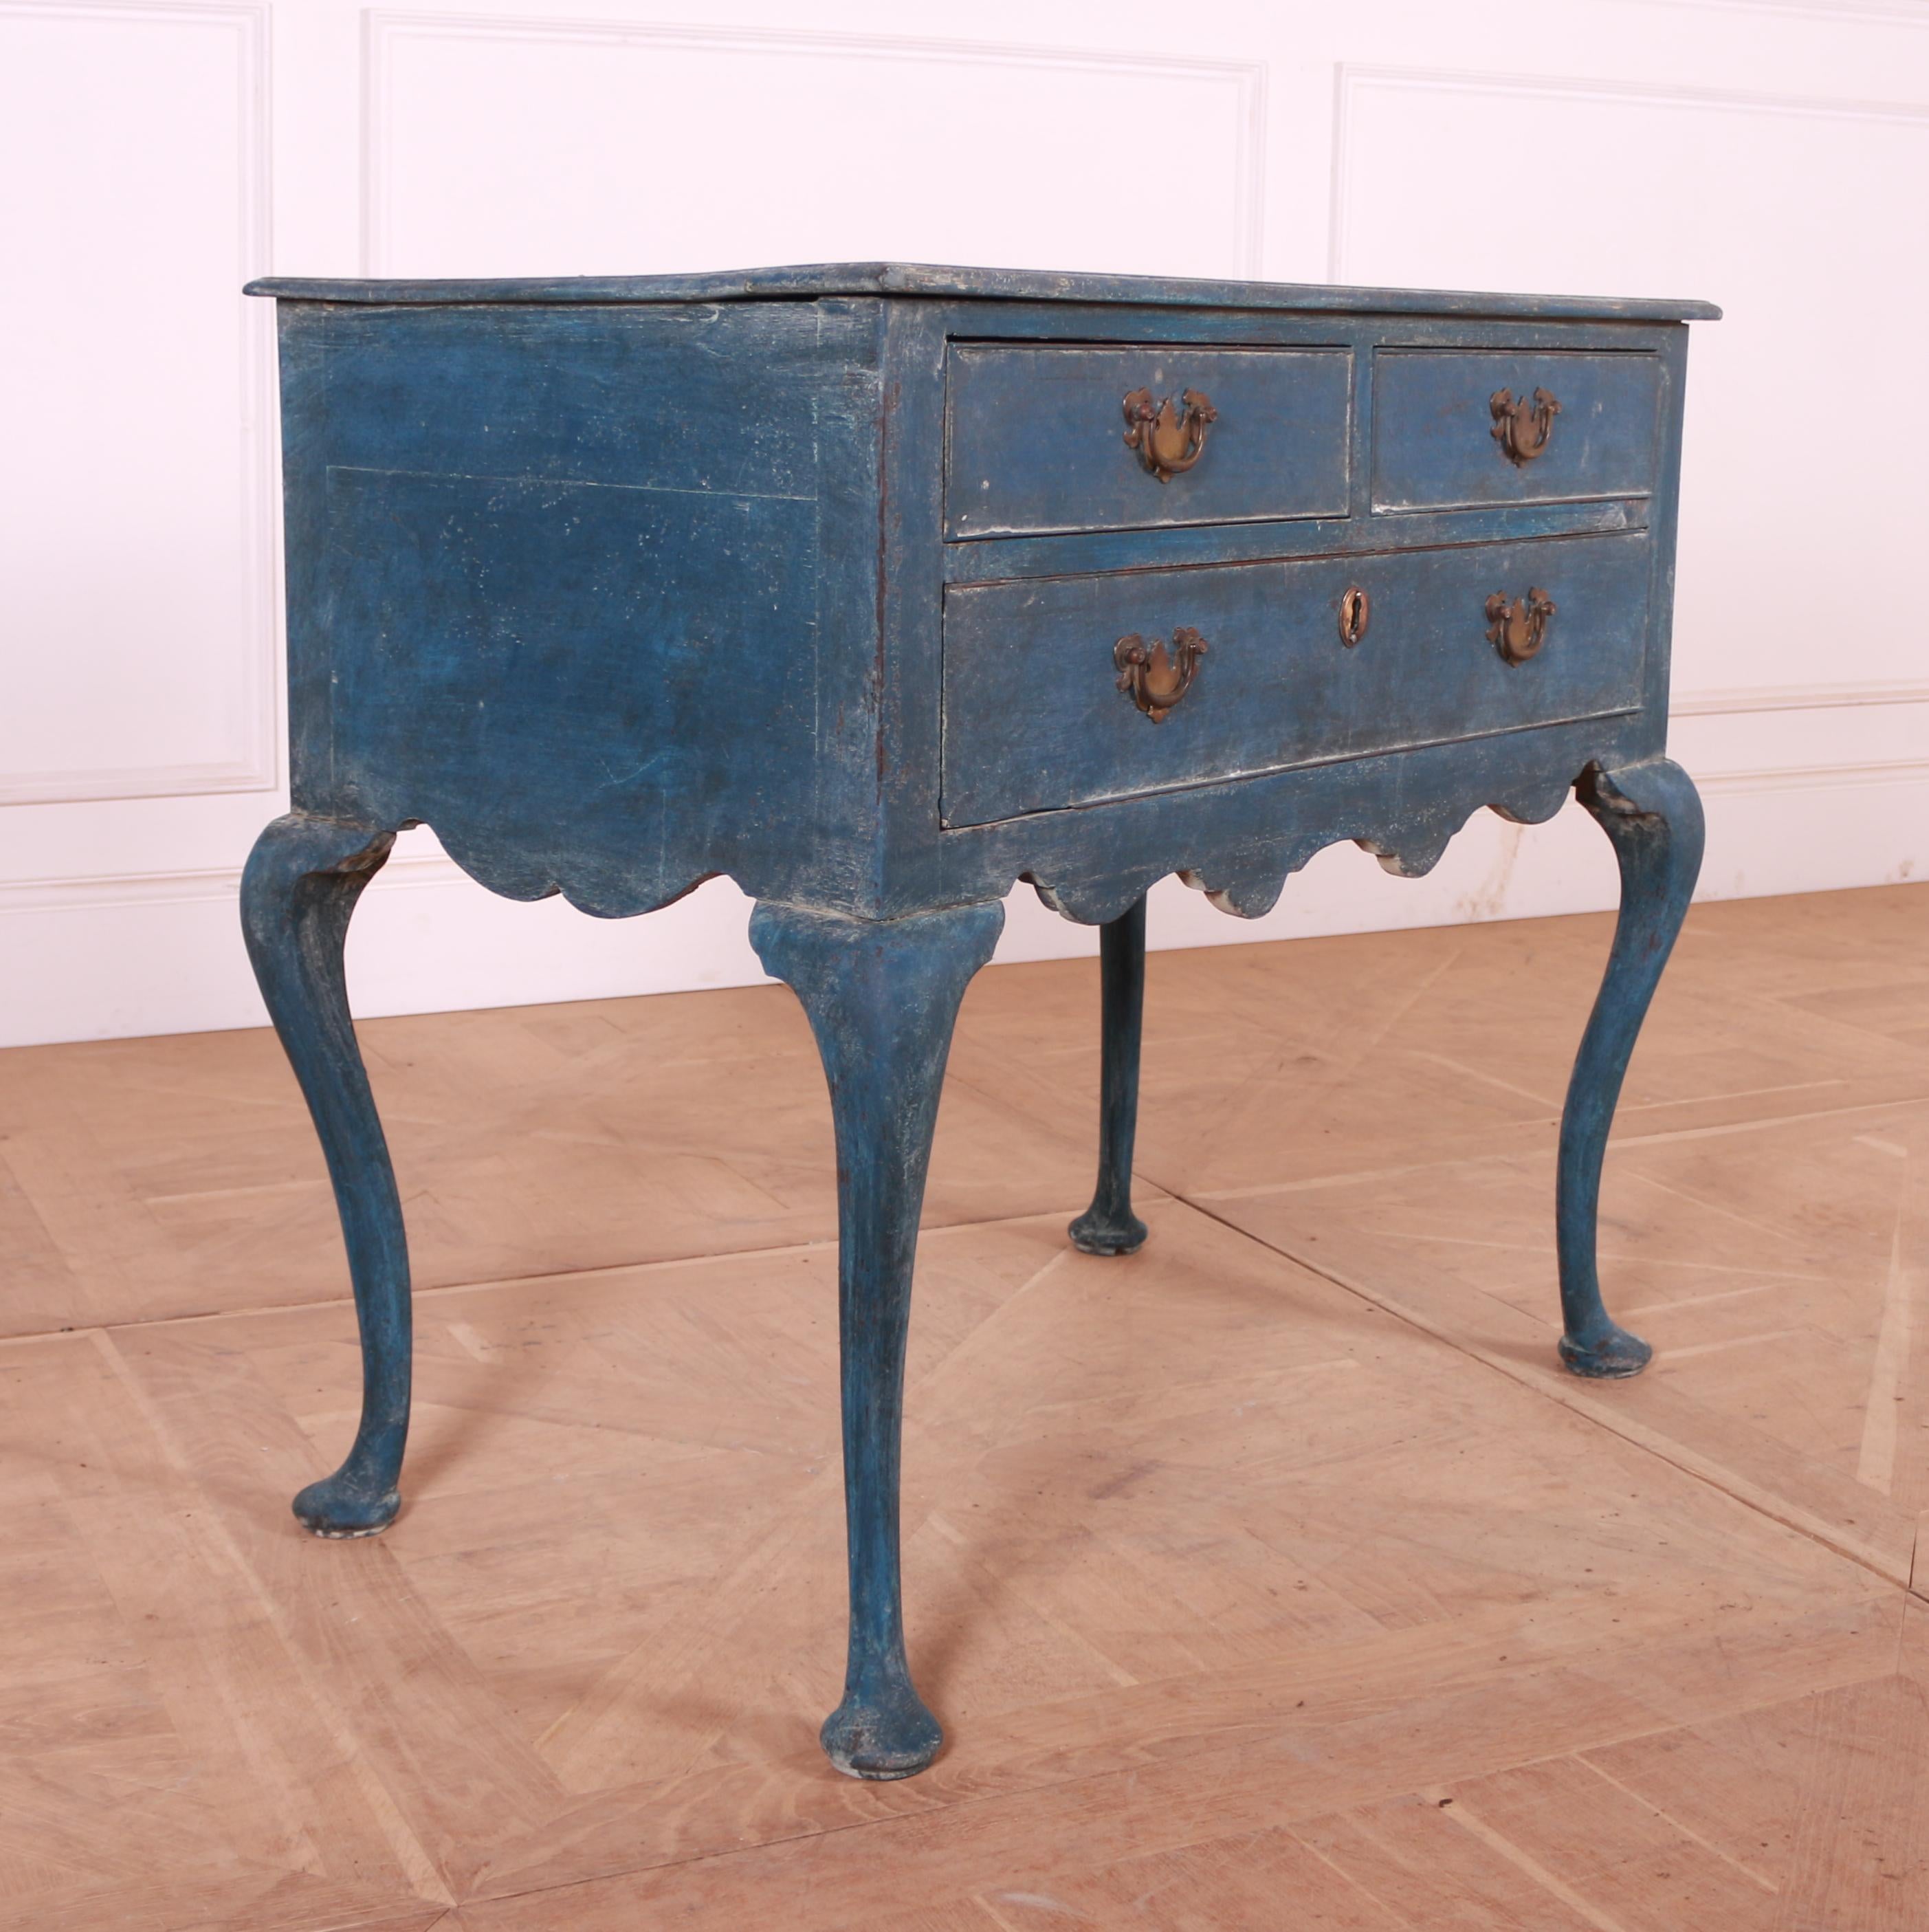 18th C English painted oak lamp table on cabriole legs. 1780.

Reference: 7727

Dimensions
34 inches (86 cms) Wide
20 inches (51 cms) Deep
30.5 inches (77 cms) High